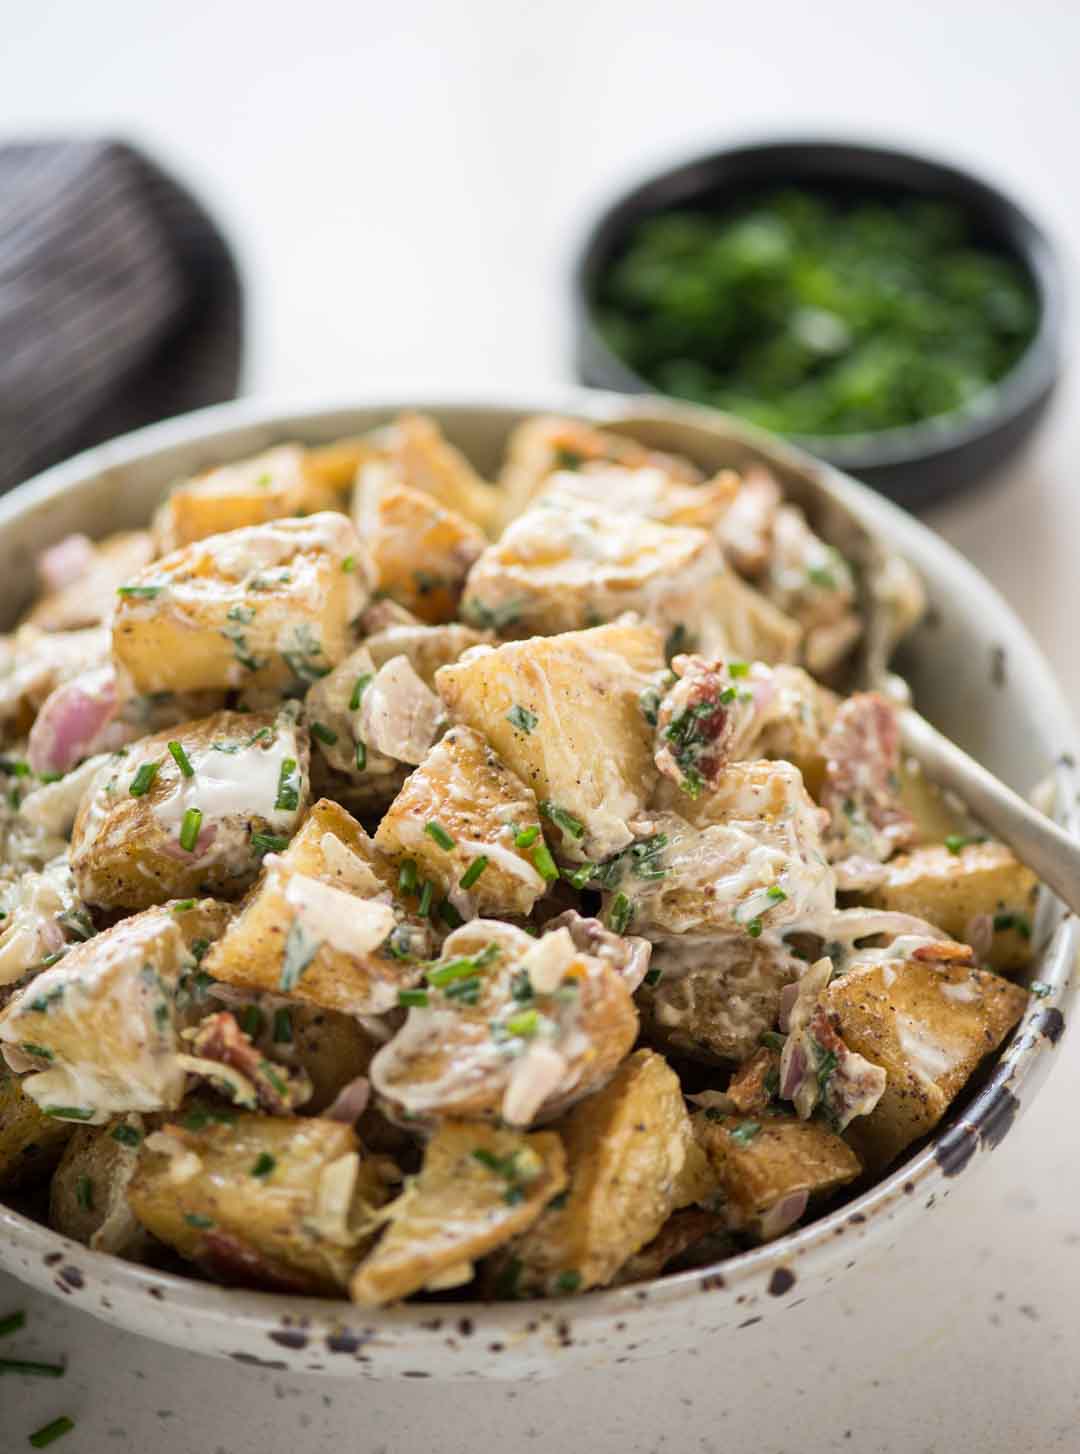 Roasted Potato Salad has Crunchy Roasted Potatoes, crispy Bacon, Onion, herb and a light creamy dressing. One of the best side dish to serve summer potluck or BBQ parties.